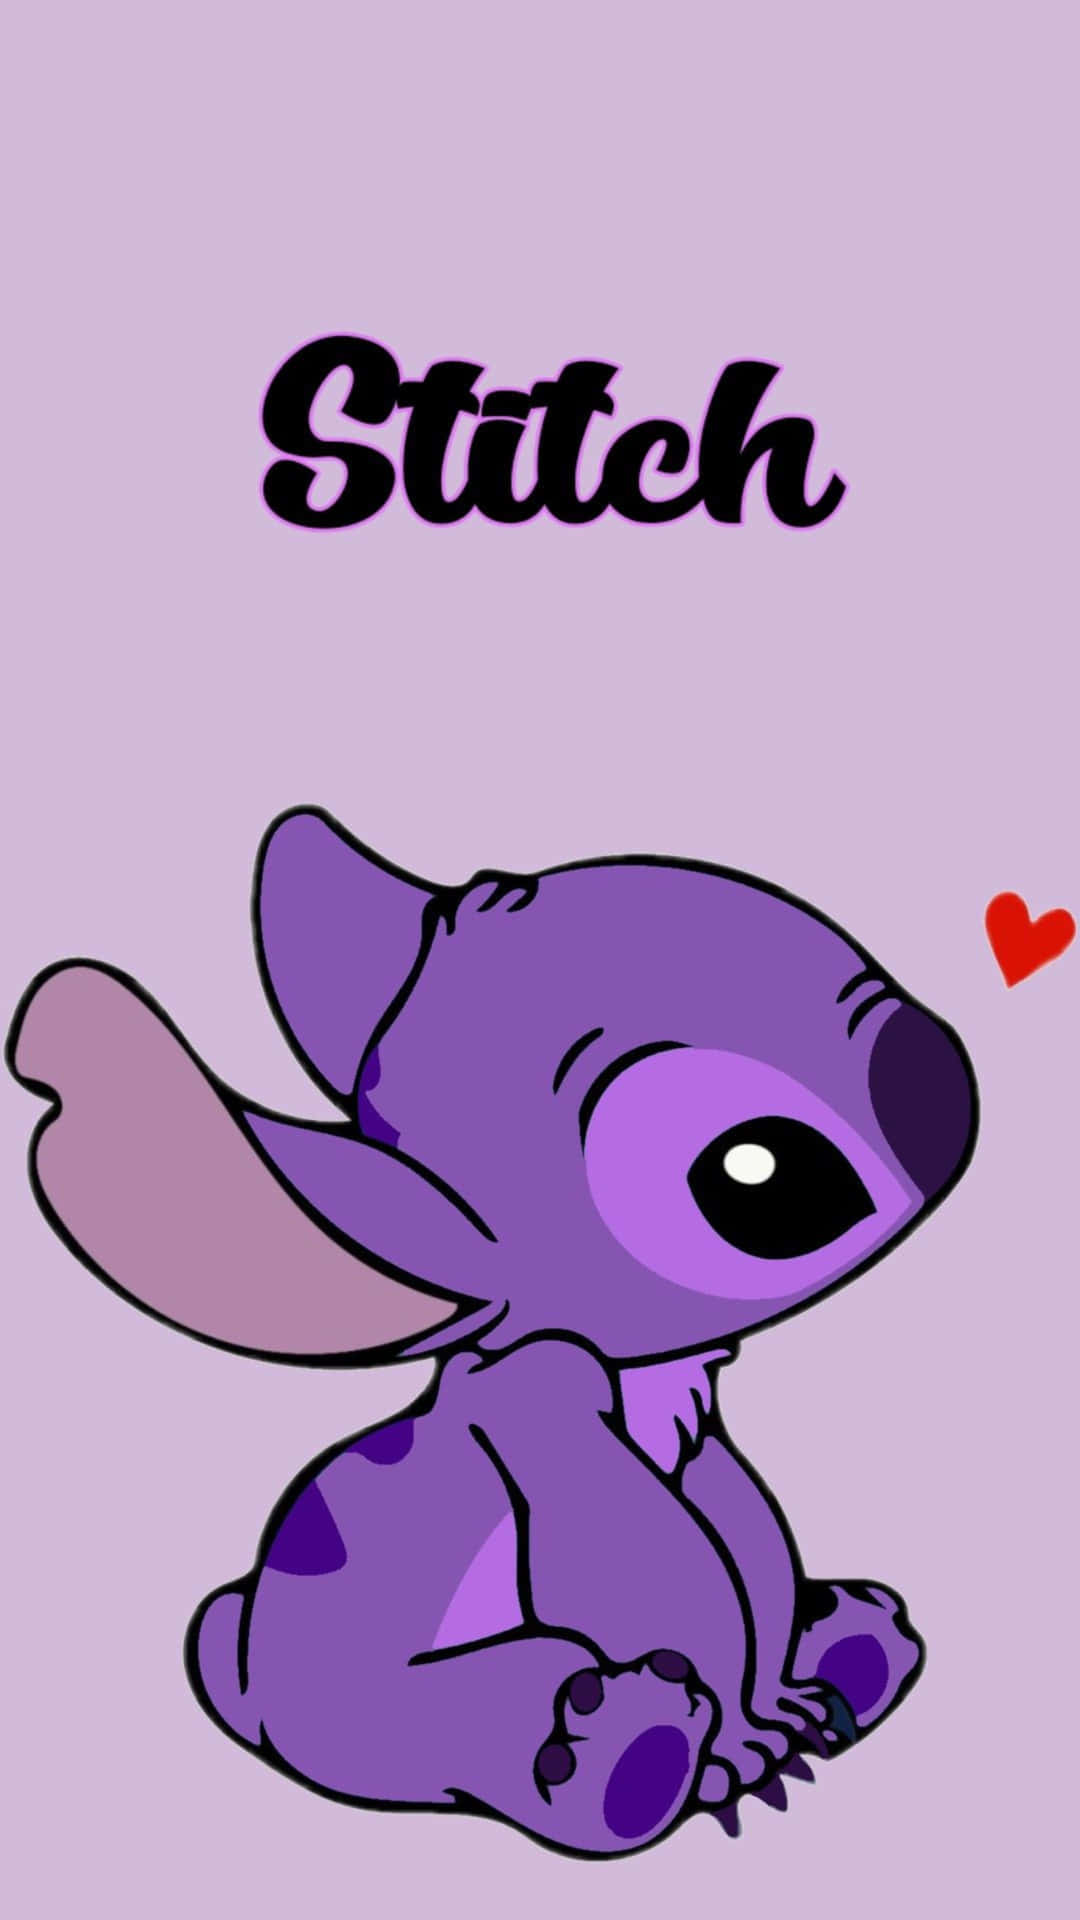 Adorable Purple Stitch With Heart Wallpaper